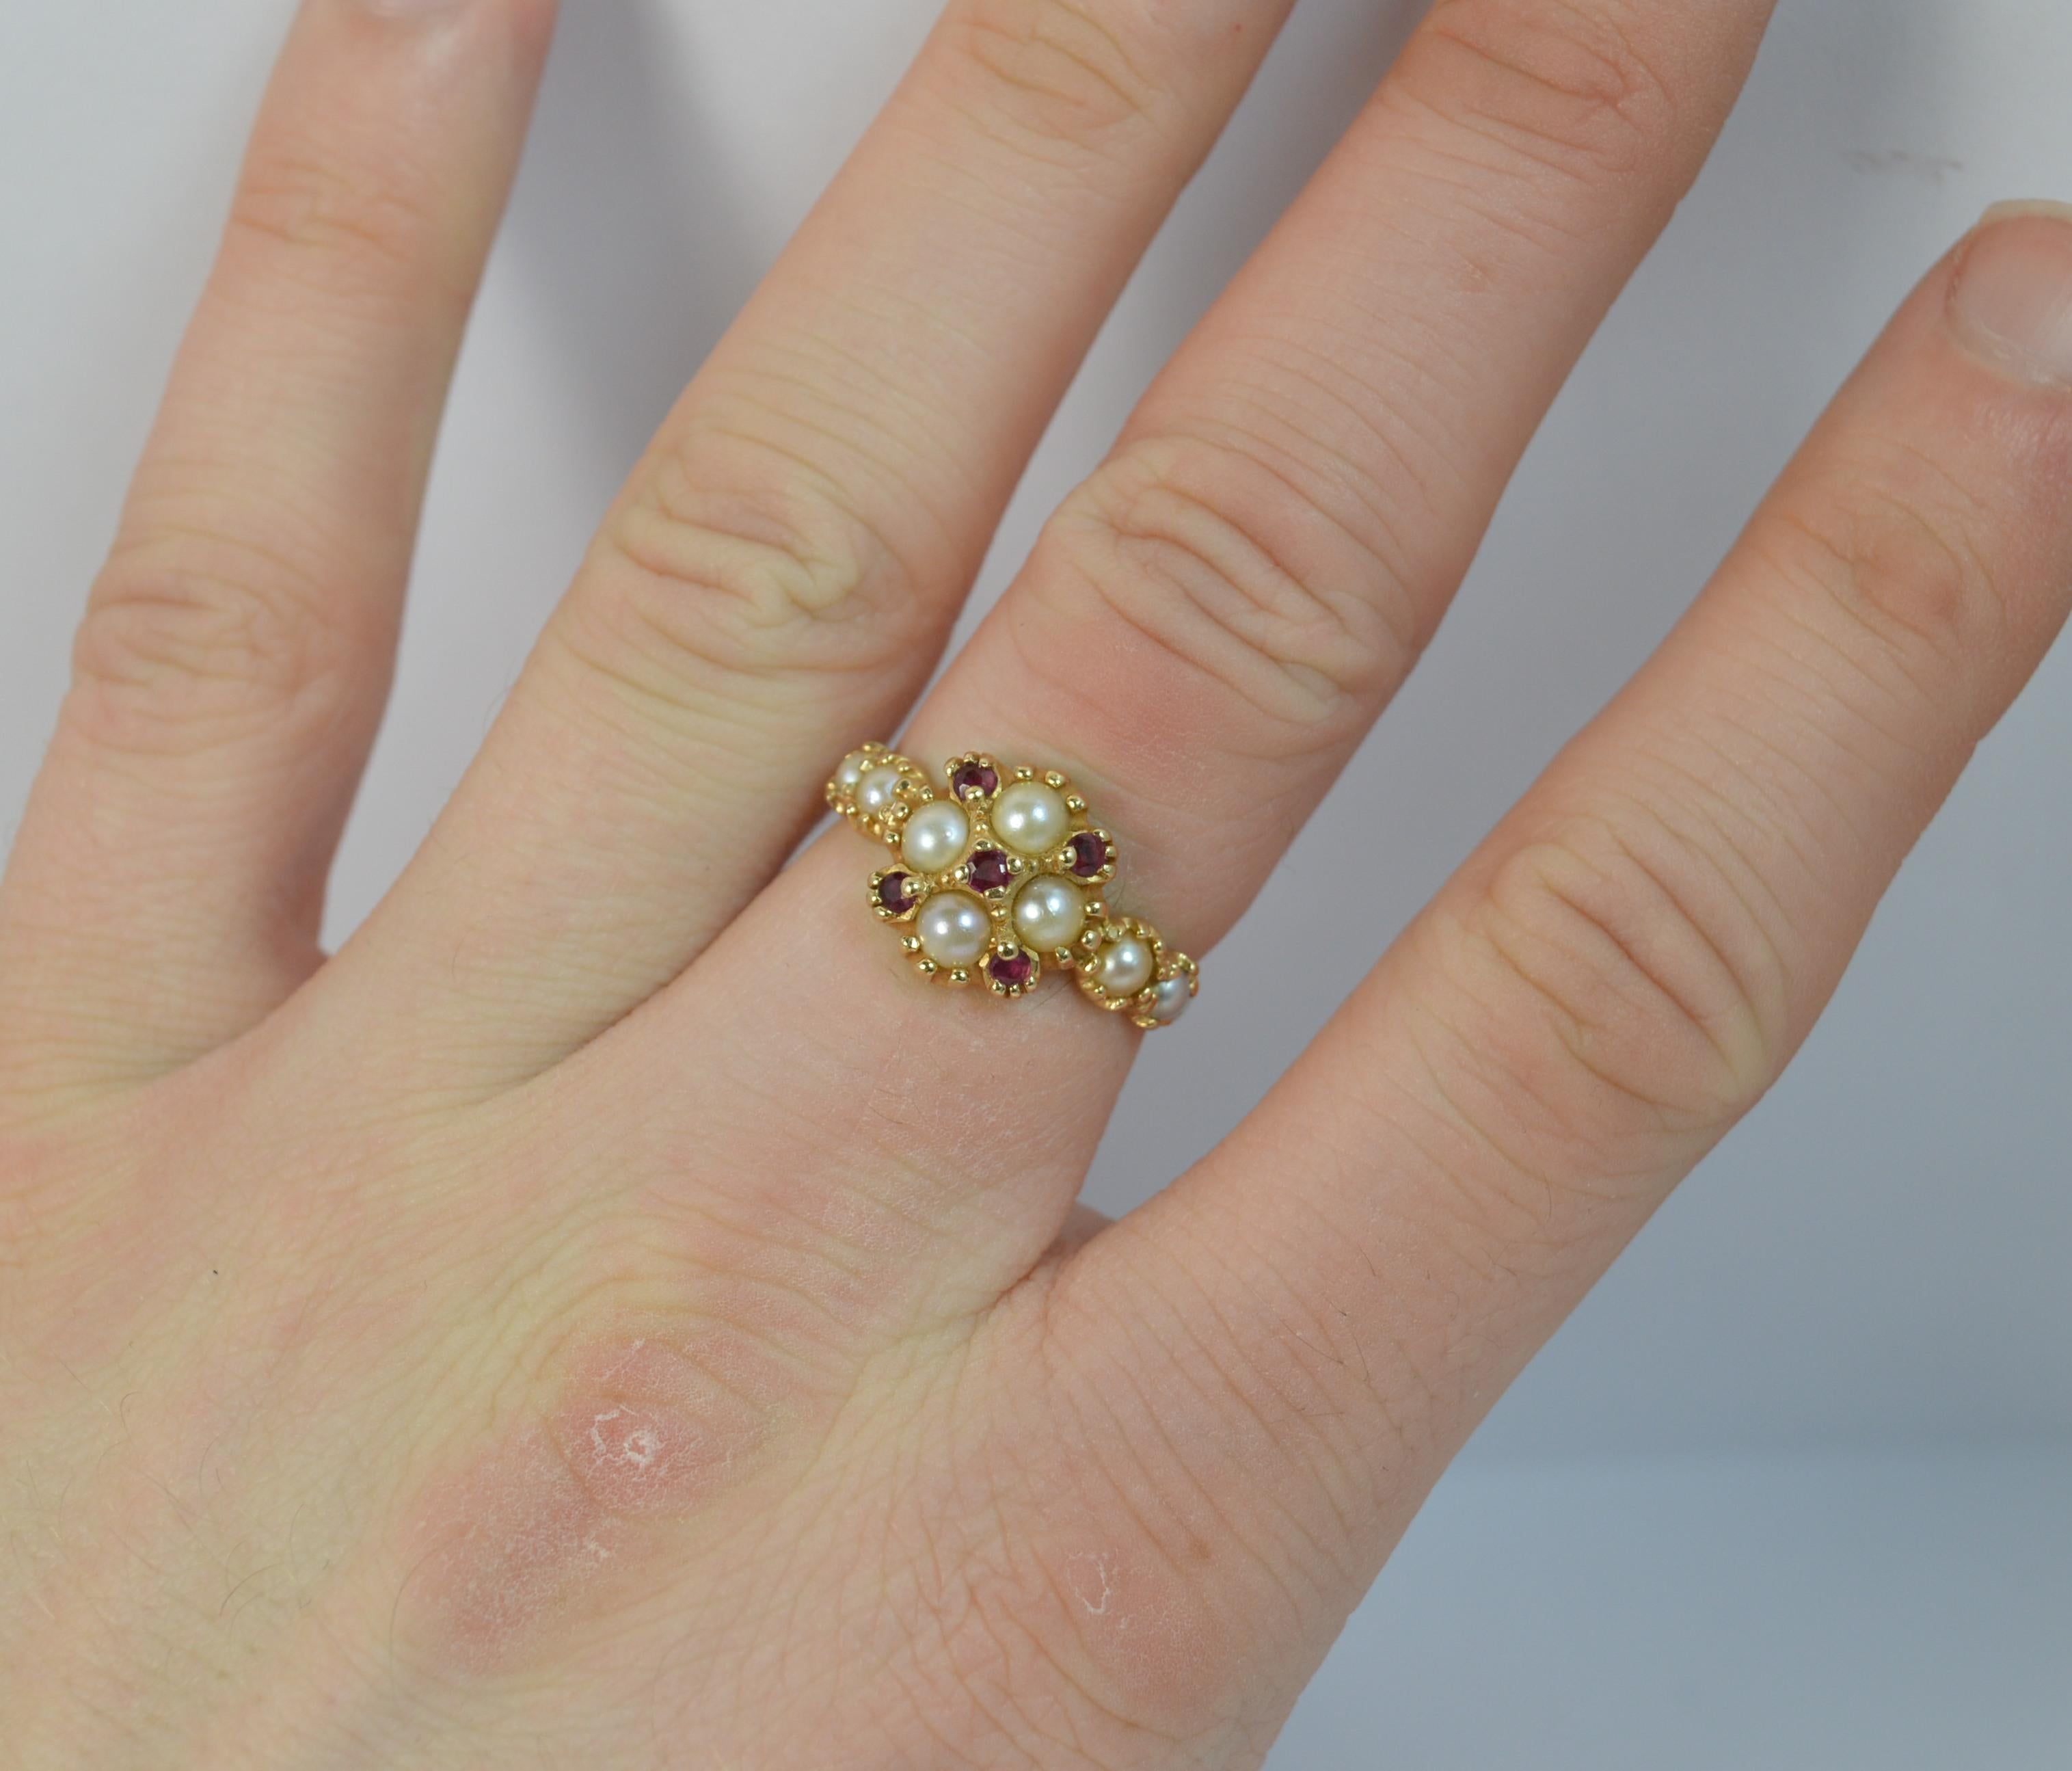 A vintage Victorian design ring.
Size ; N UK, 6 1/4 US
14 carat yellow gold example.

Set with four pearls and five rubies to the head and a further two pearls to each shoulder.

10mm x 11mm head.

Condition ; Excellent. Clean and solid band. Well